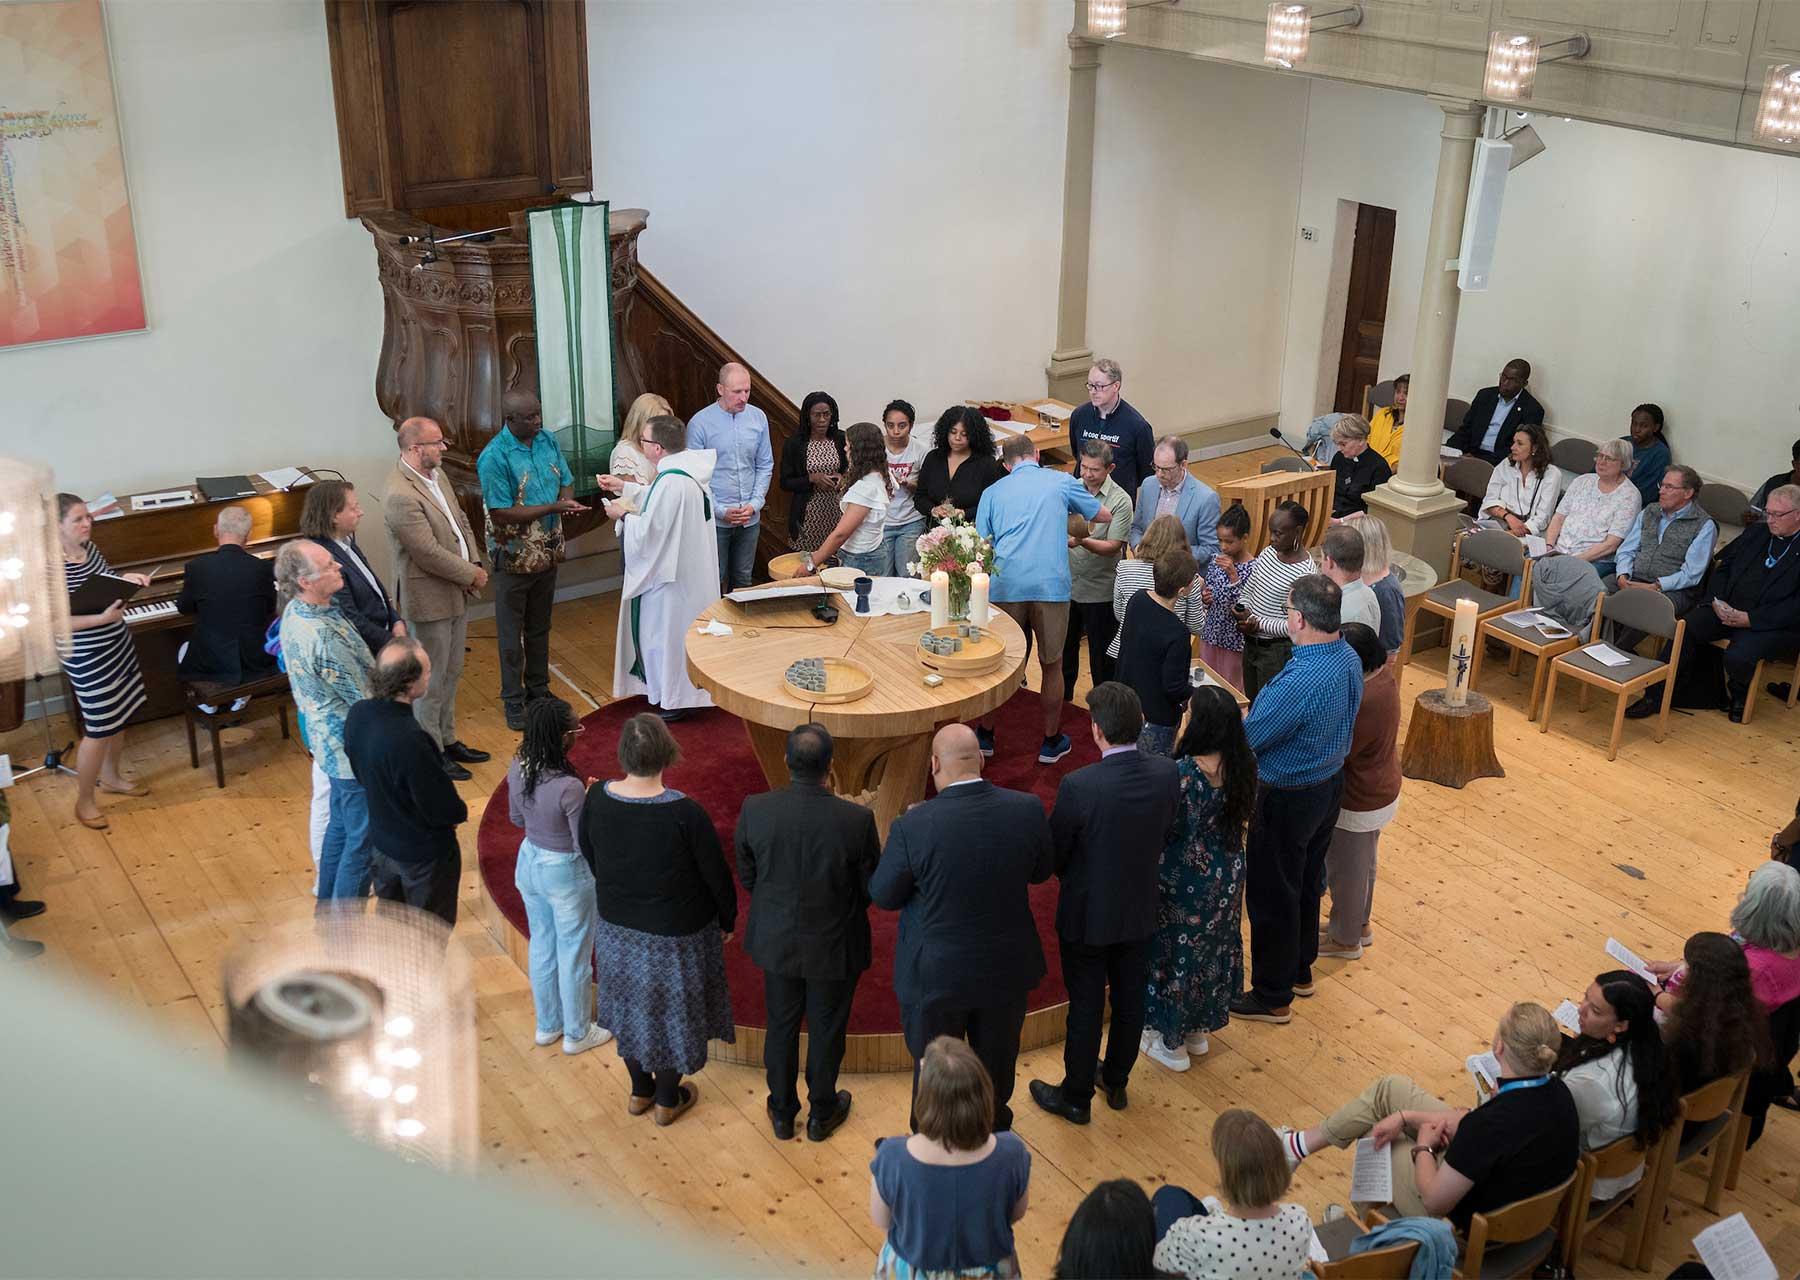 LWF Assistant General Secretary for Ecumenical Relations, Prof. Dirk Lange distributes Holy Communion as Council members join the local congregations of the Evangelical Lutheran Church of Geneva for Sunday worship. Photo: LWF/A. Hillert